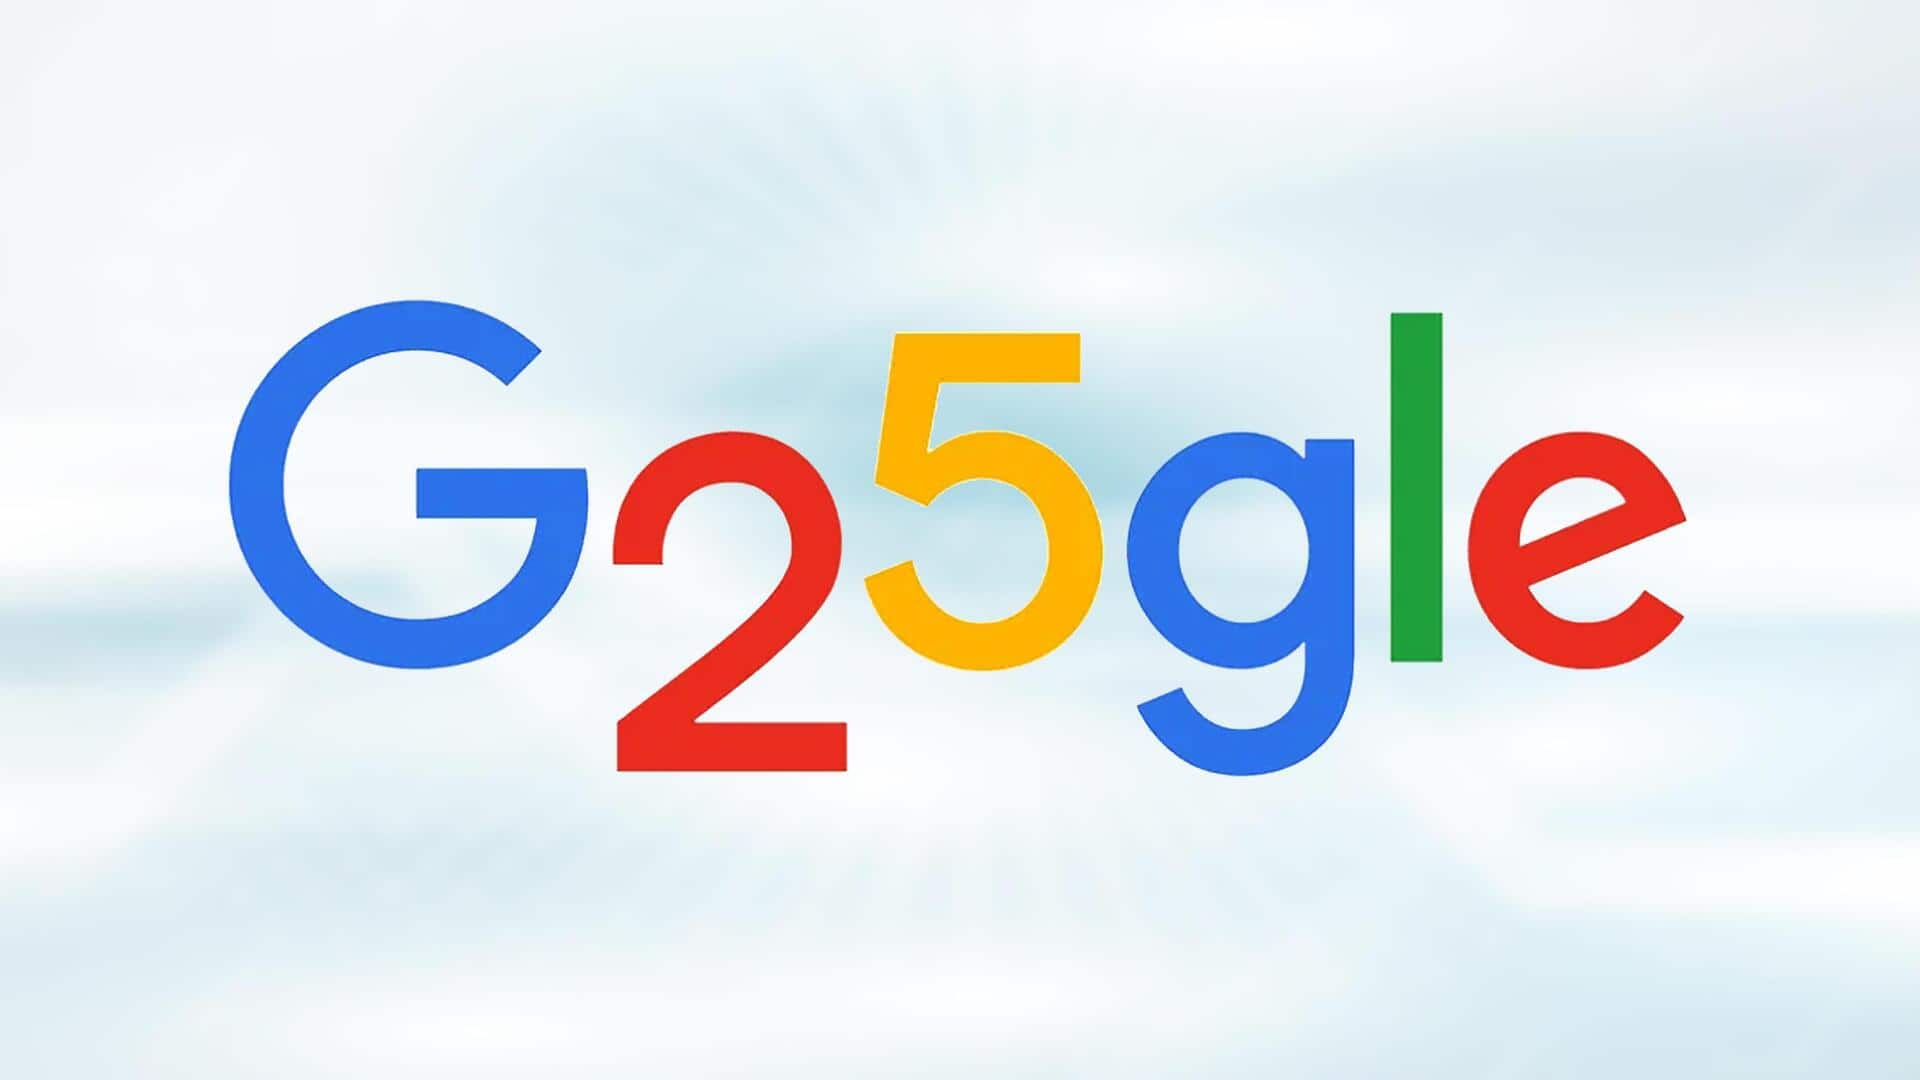 Google turns 25; celebrates with a special Doodle